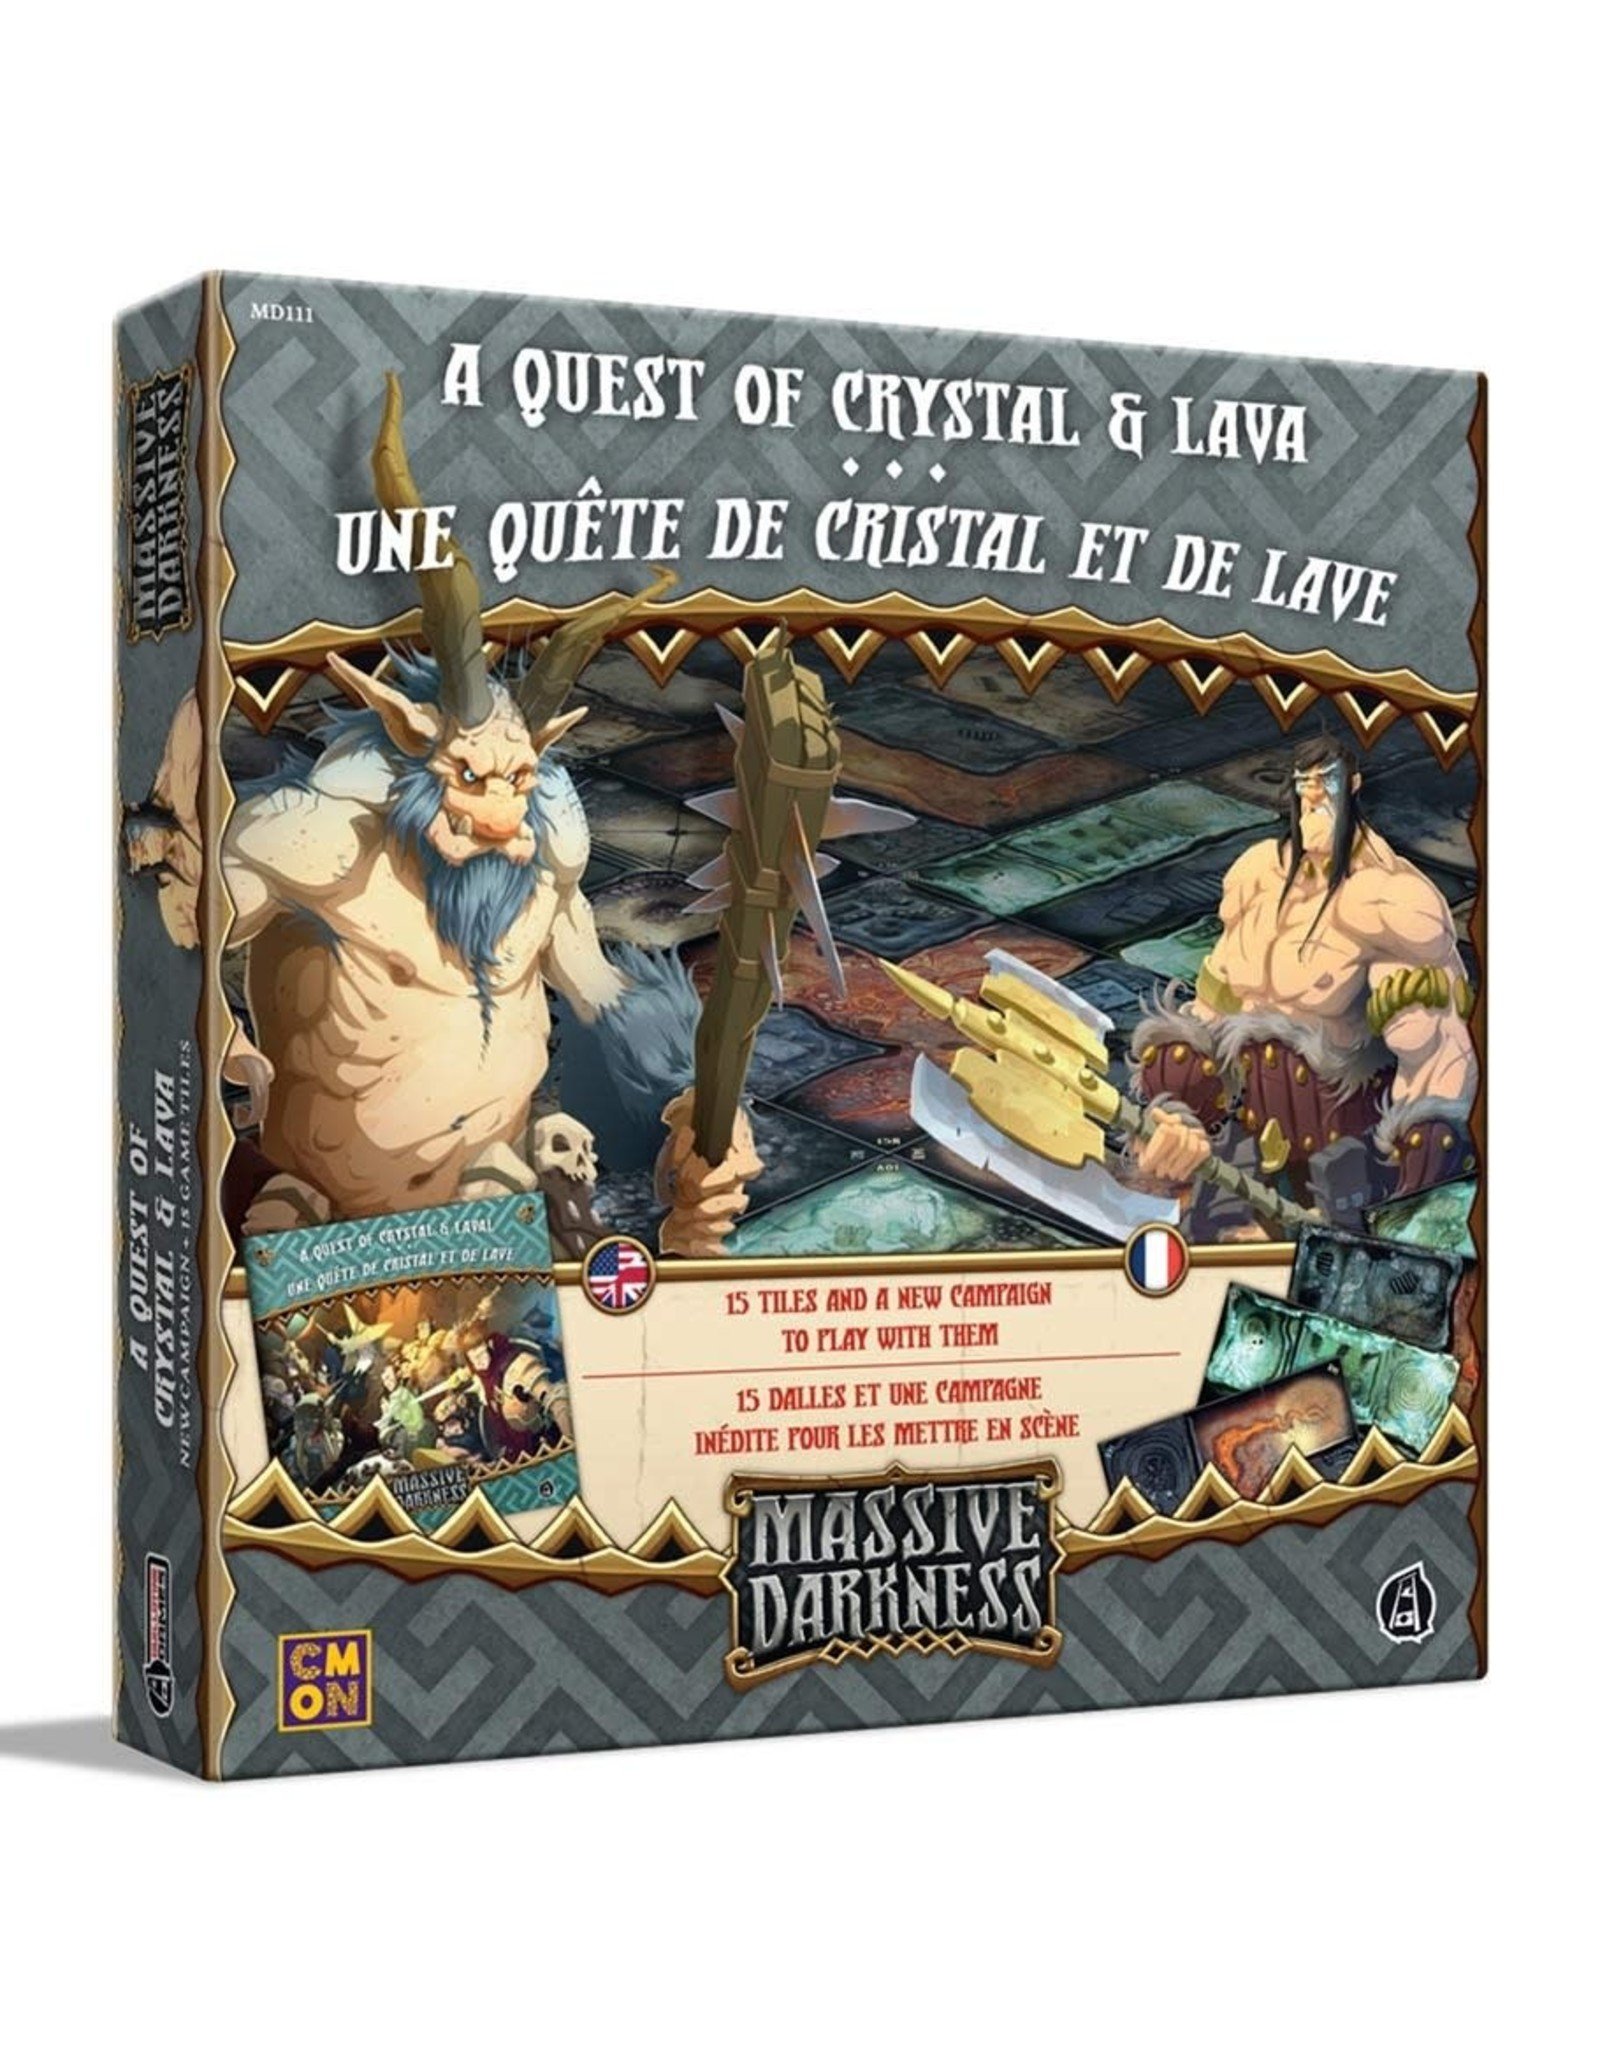 Cool Mini or Not Massive Darkness 2: Quest of Crystal & Lava Tiles Set